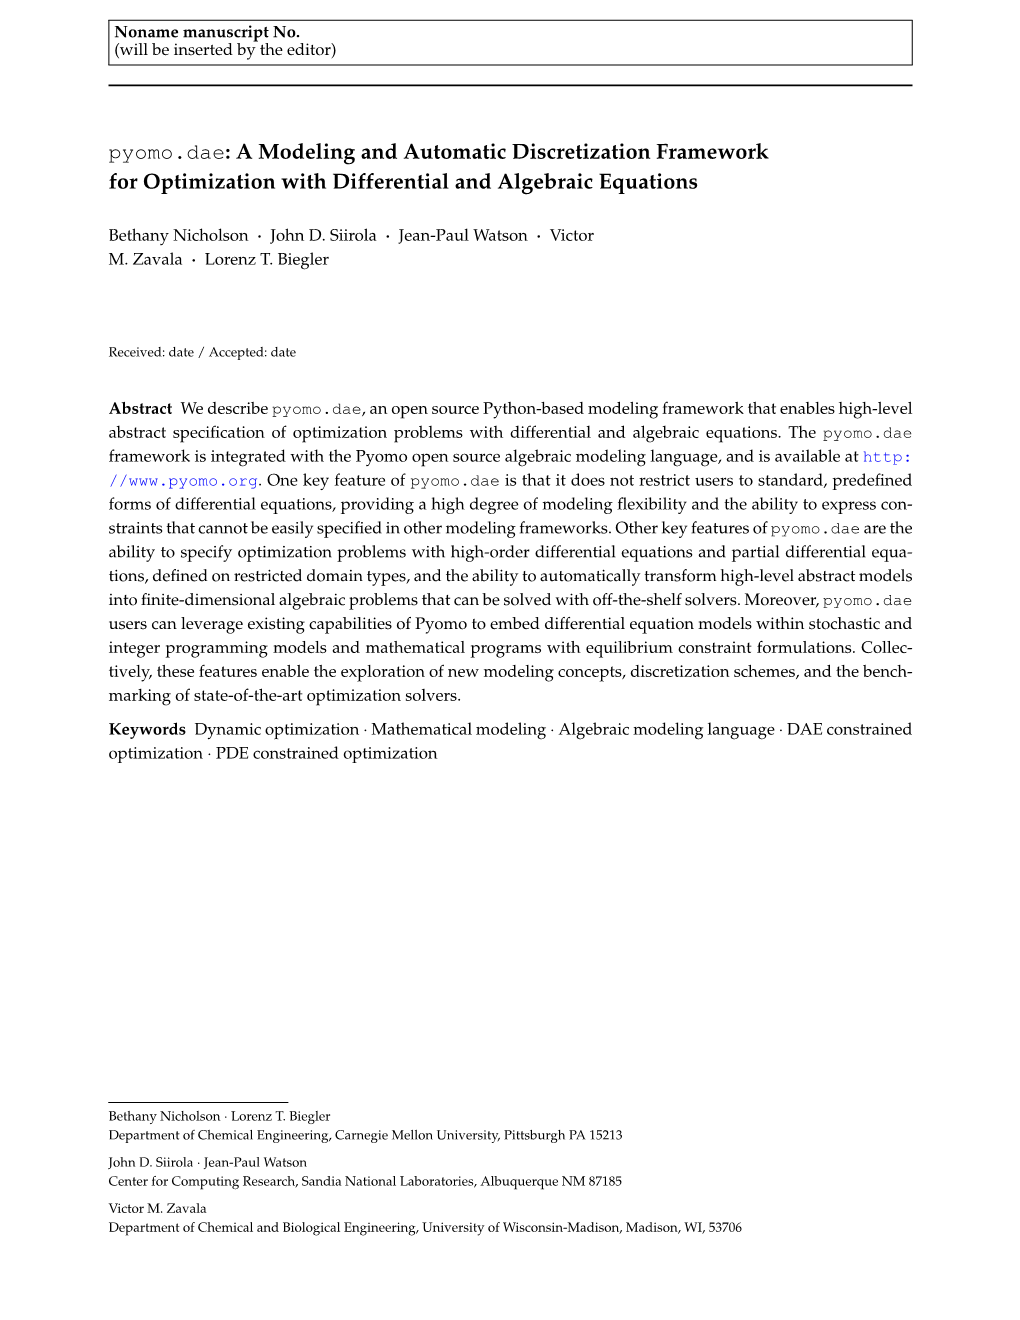 Pyomo.Dae: a Modeling and Automatic Discretization Framework for Optimization with Differential and Algebraic Equations